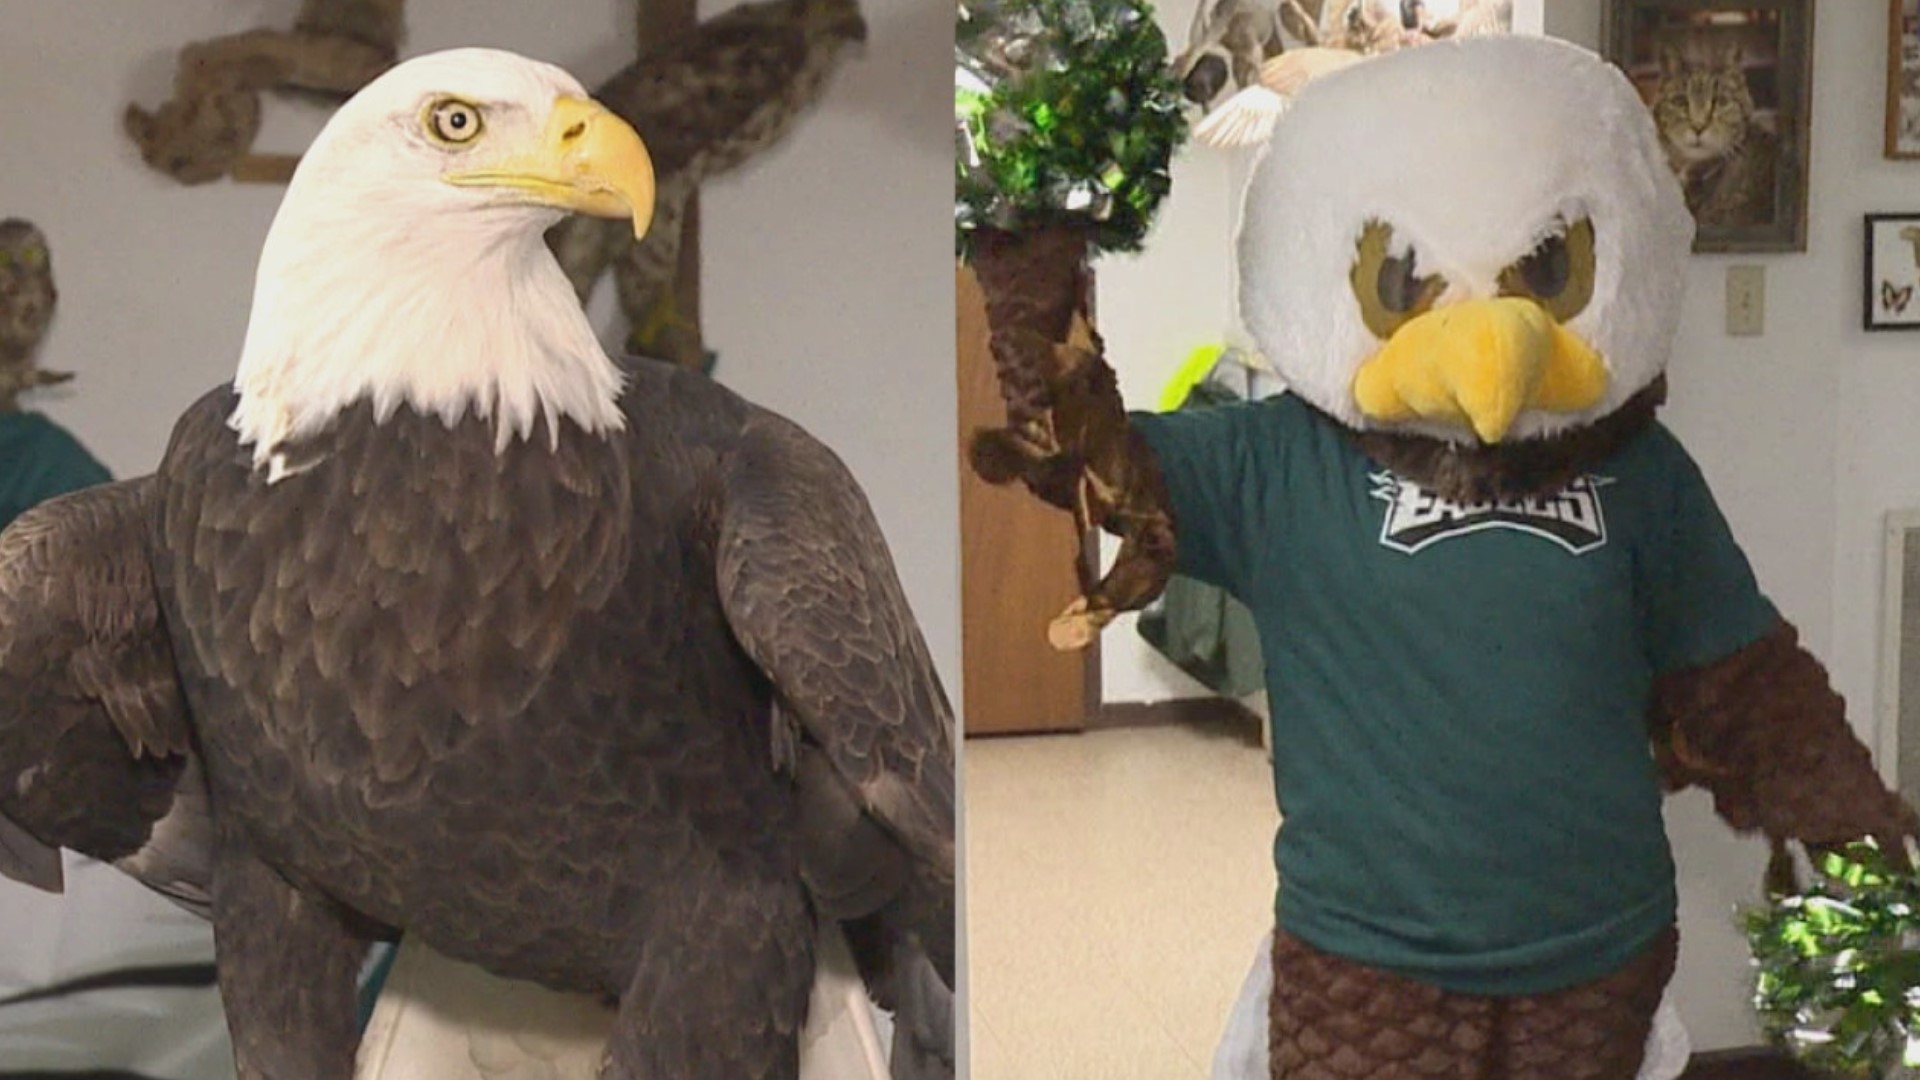 It's all about the "Birds" this week for one group in Carbon County, and no, we don't just mean the Philadelphia Eagles.